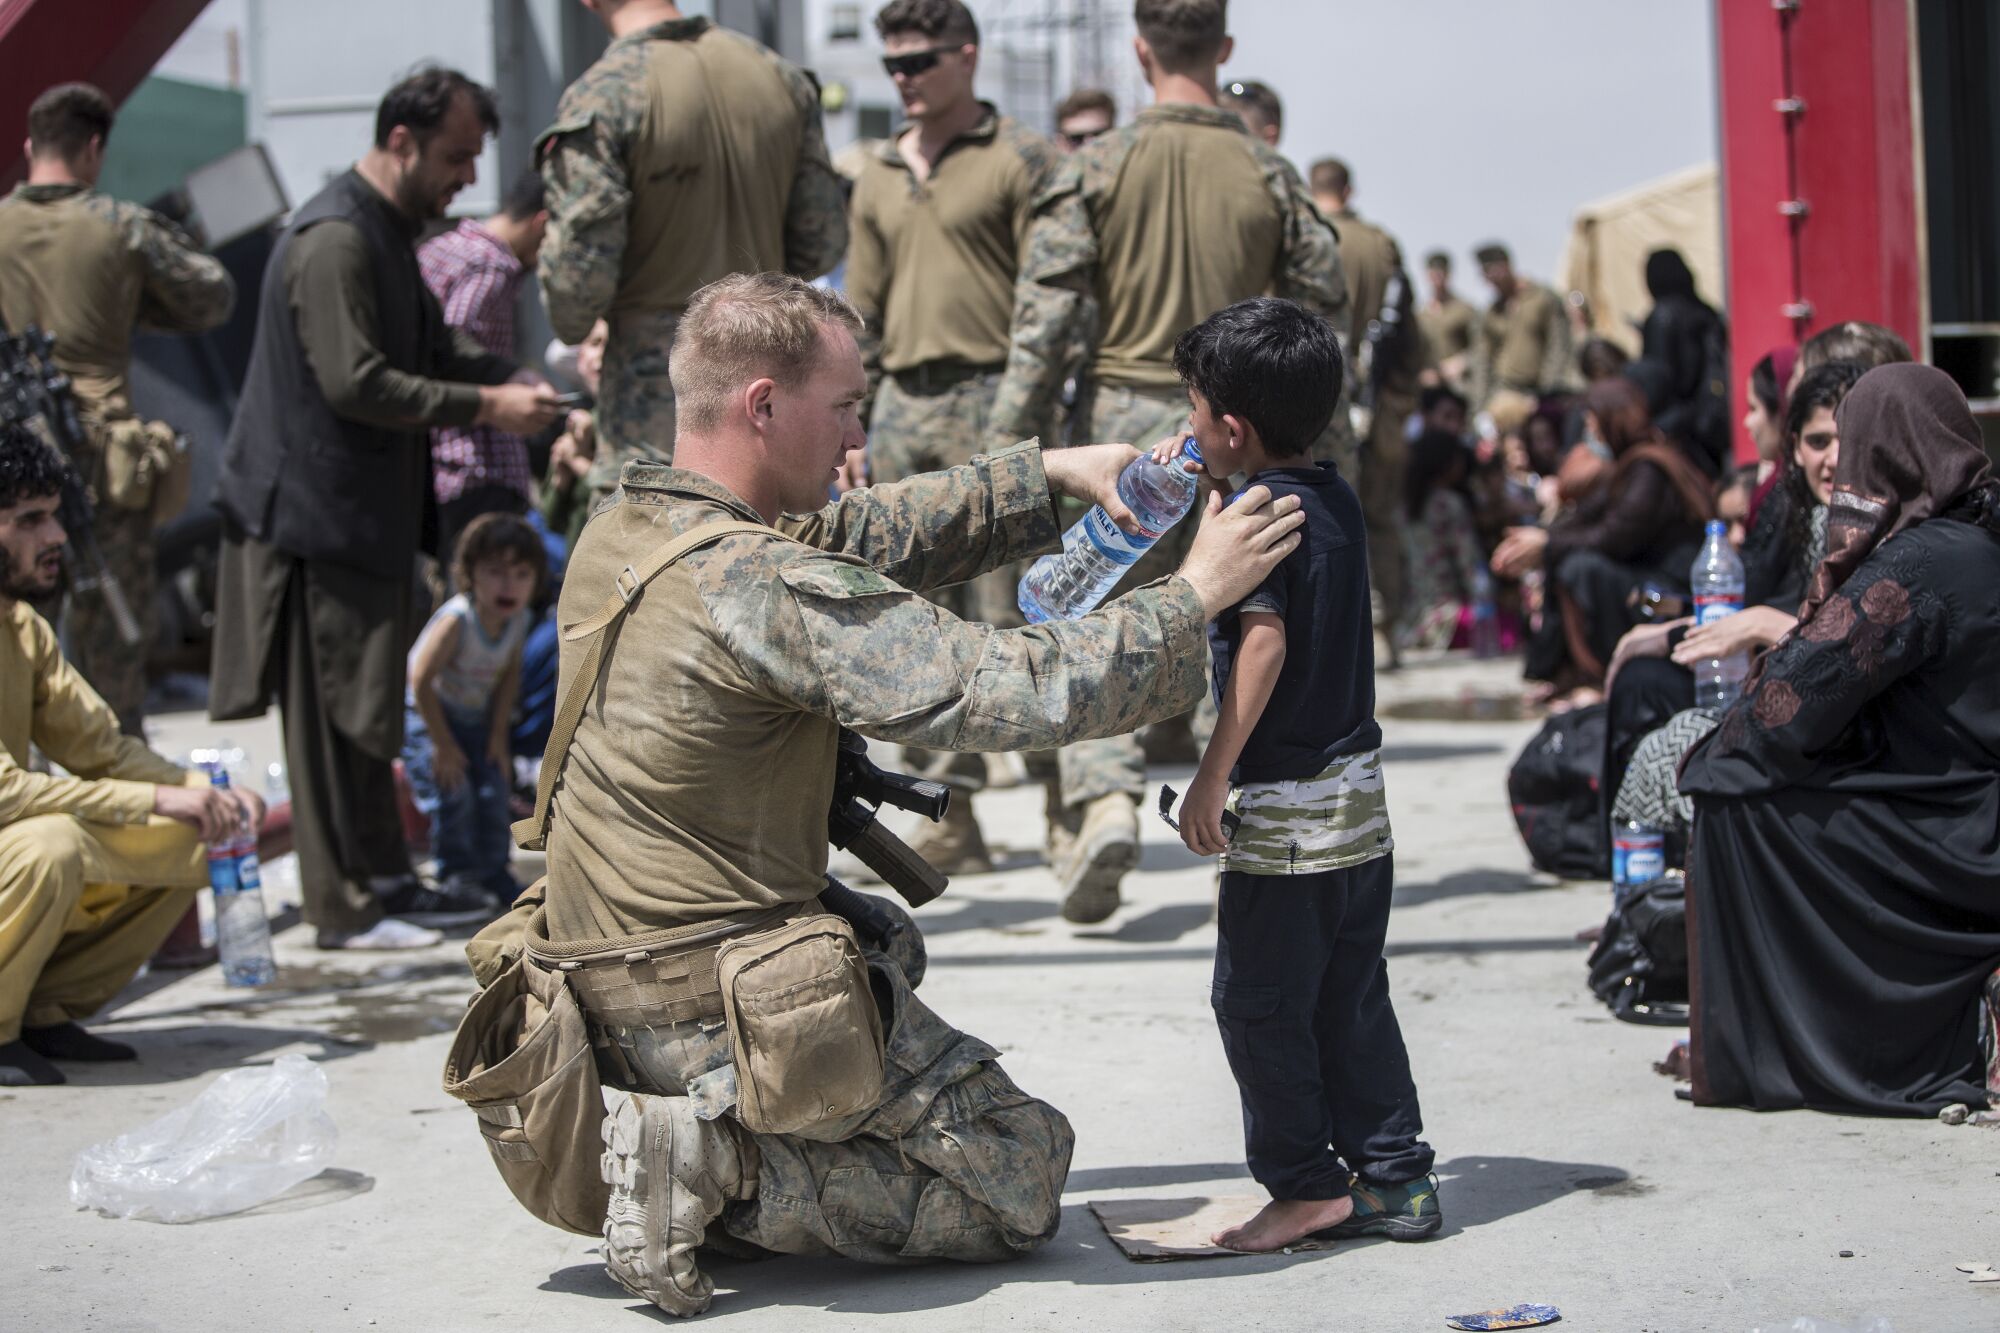 A U.S. Marine with the 24th Marine Expeditionary Unit (MEU) provides fresh water to a child during an evacuation